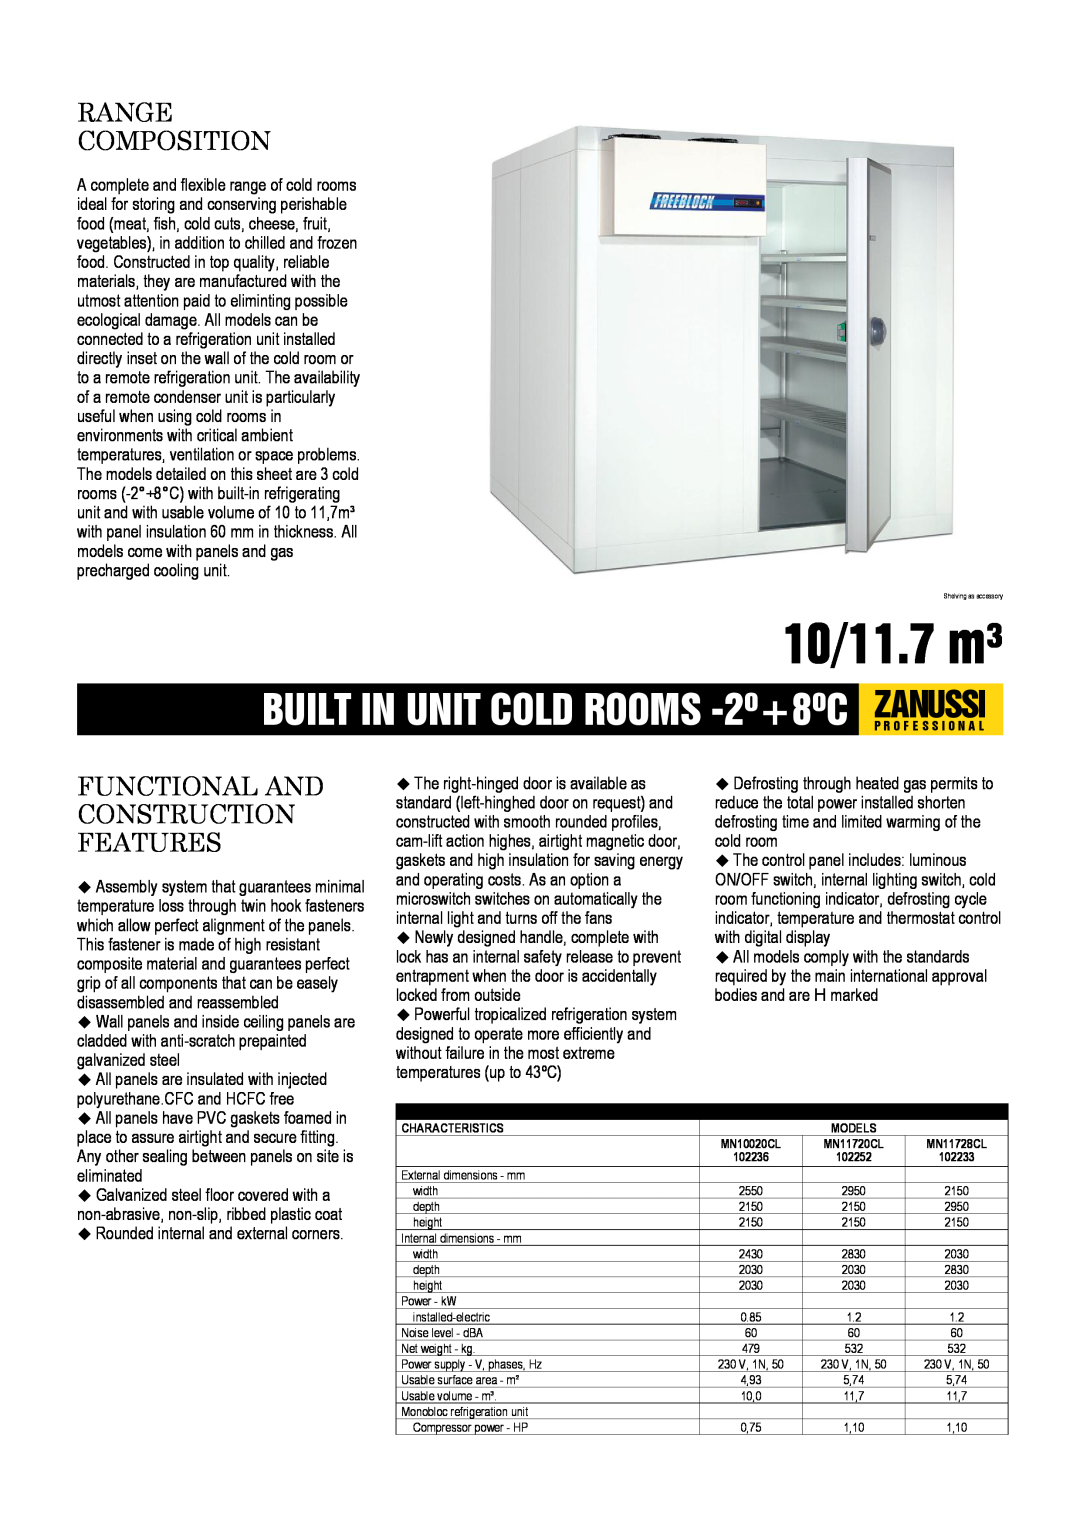 Zanussi MN10020CL, MN11728CL, MN11720CL dimensions 10/11.7 m³, Range Composition, Functional And Construction Features 